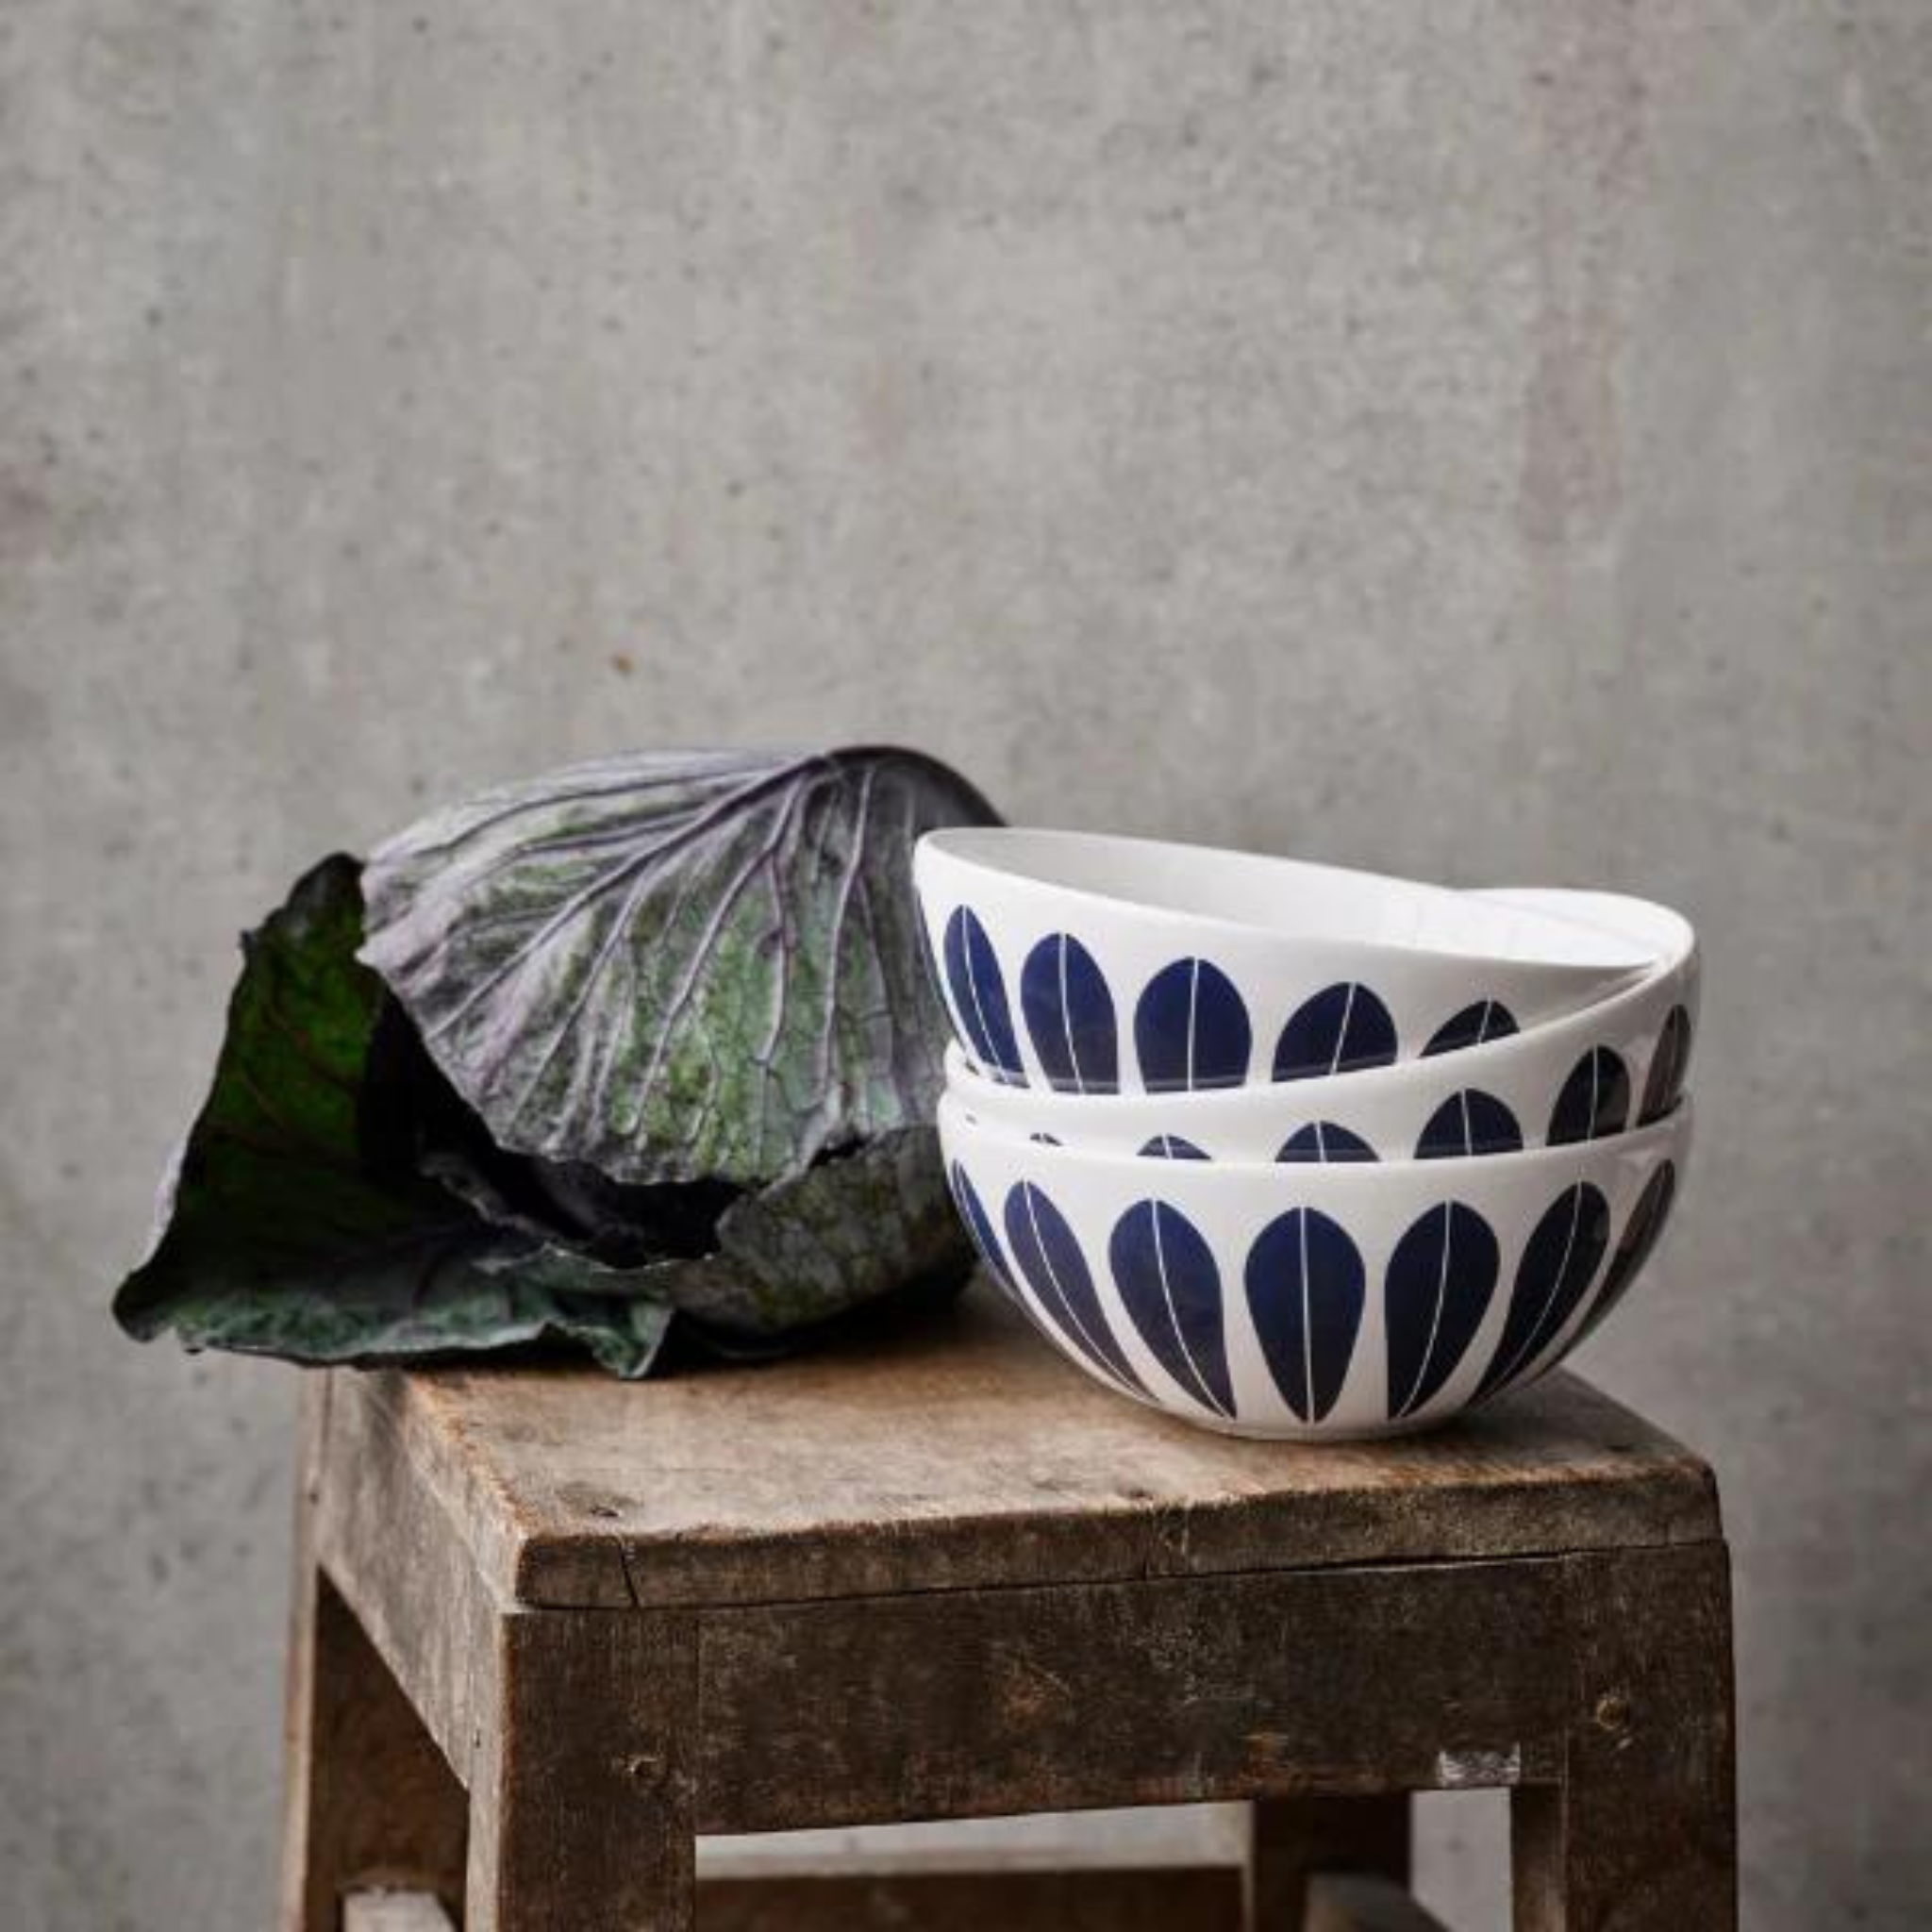 White and Blue glazed bowl with a lotus flower-inspired design by Arne Clausen. The bowl features a repeating pattern of lotus petals arranged in a circular pattern under the the bowl. 